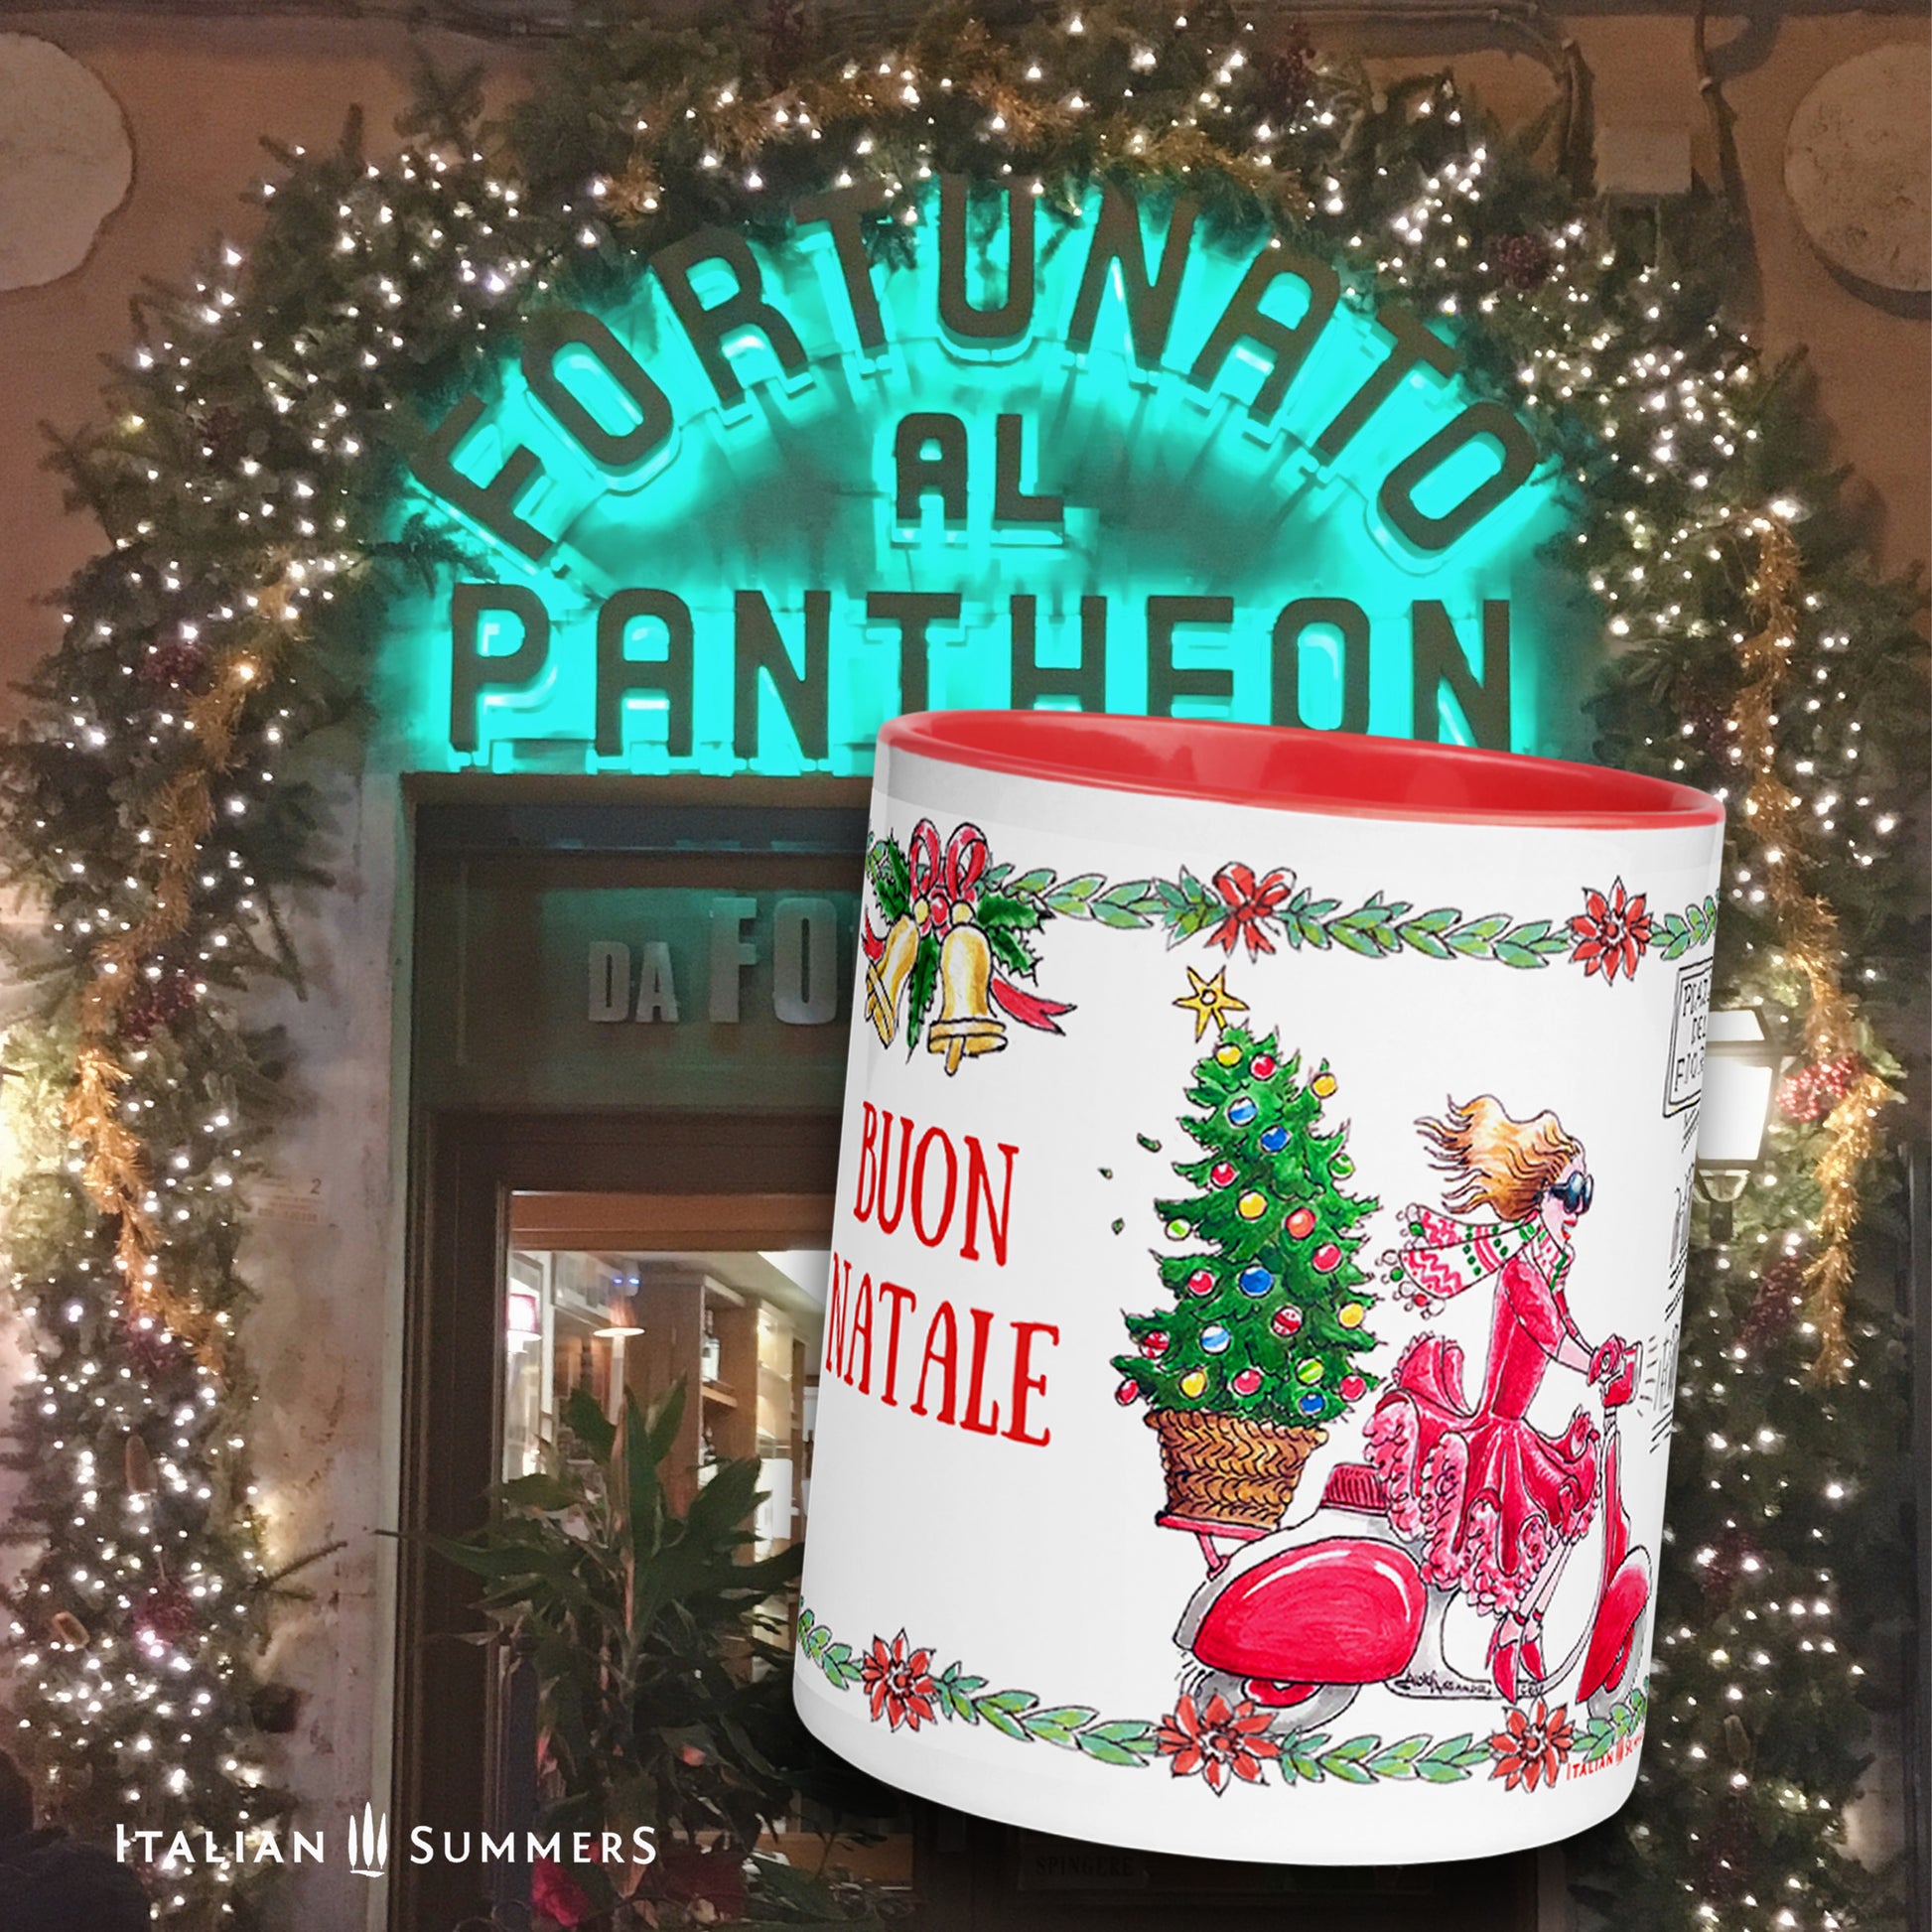 This Christmas mug ROMA is like a magical portal to the Italian holiday tradition! Imagine warmly wrapped in a cozy Italian village, sipping vino while a smiling Italian lady gesticulates towards the Colosseum. With all the features like the Vespa, Italian street sign, and Christmas tree, Buon Natale indeed! Made by Italian Summers Copyright Italian Summers